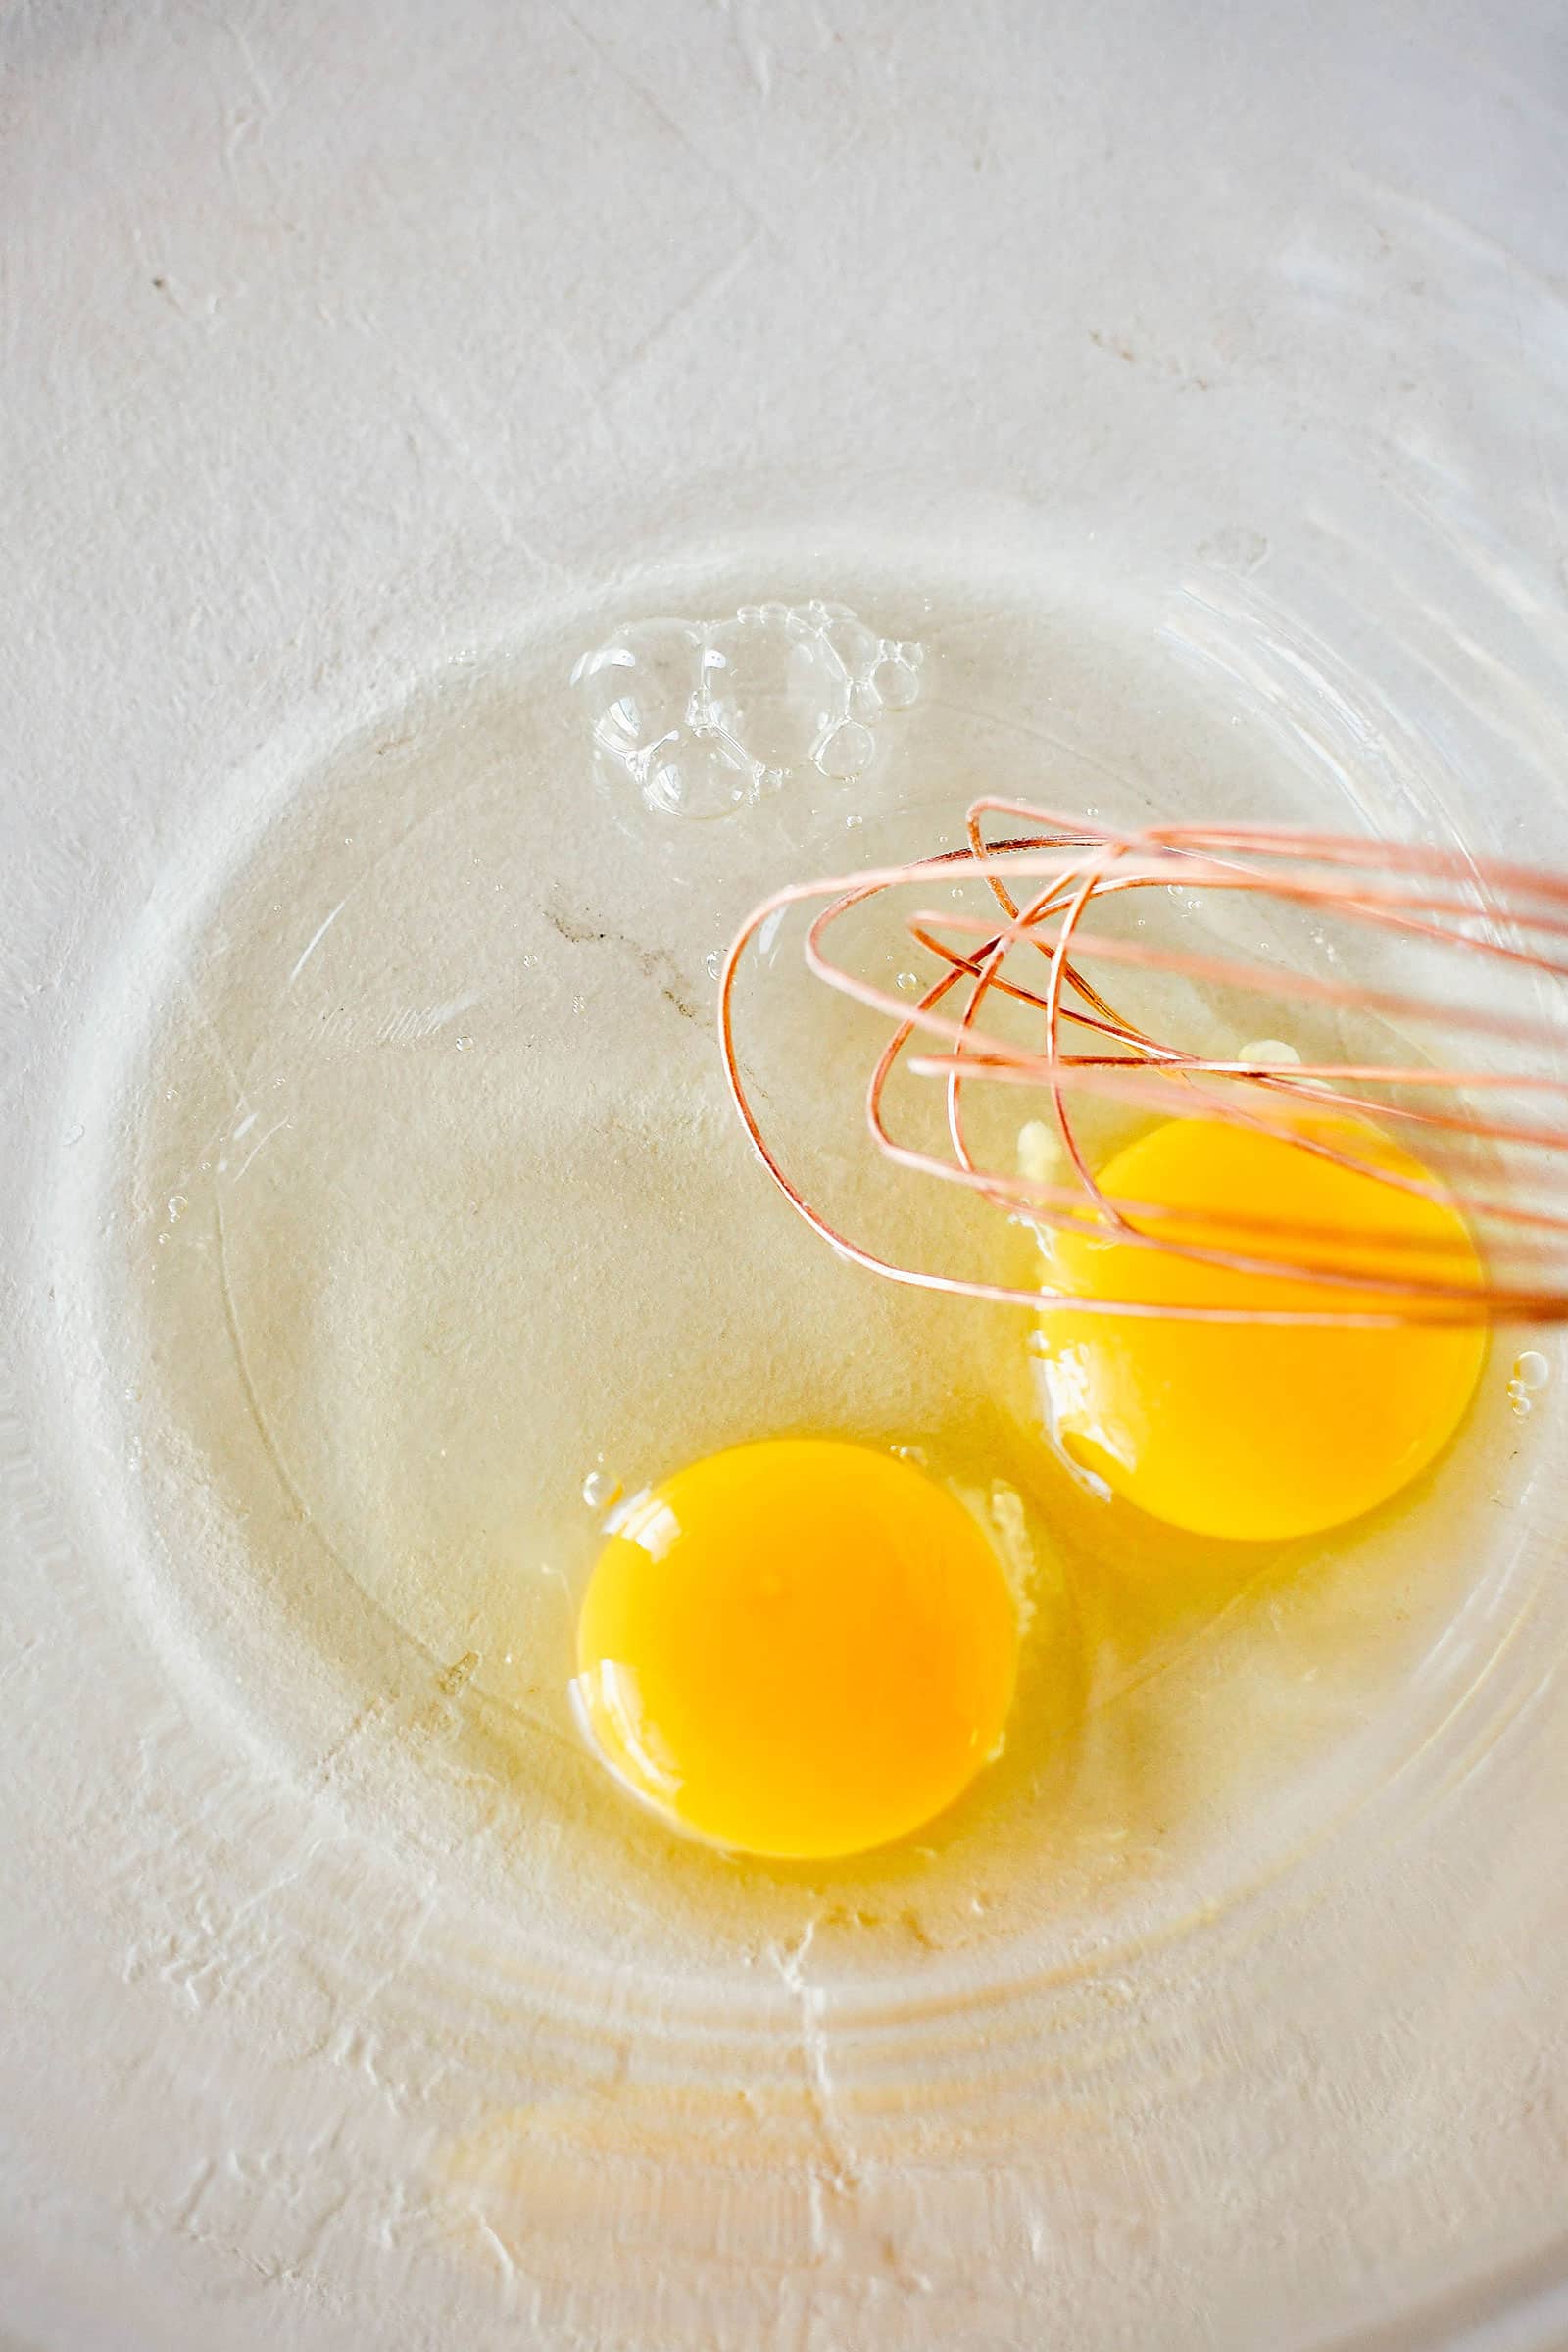 Two eggs cracked into a bowl with a whisk about to mix them